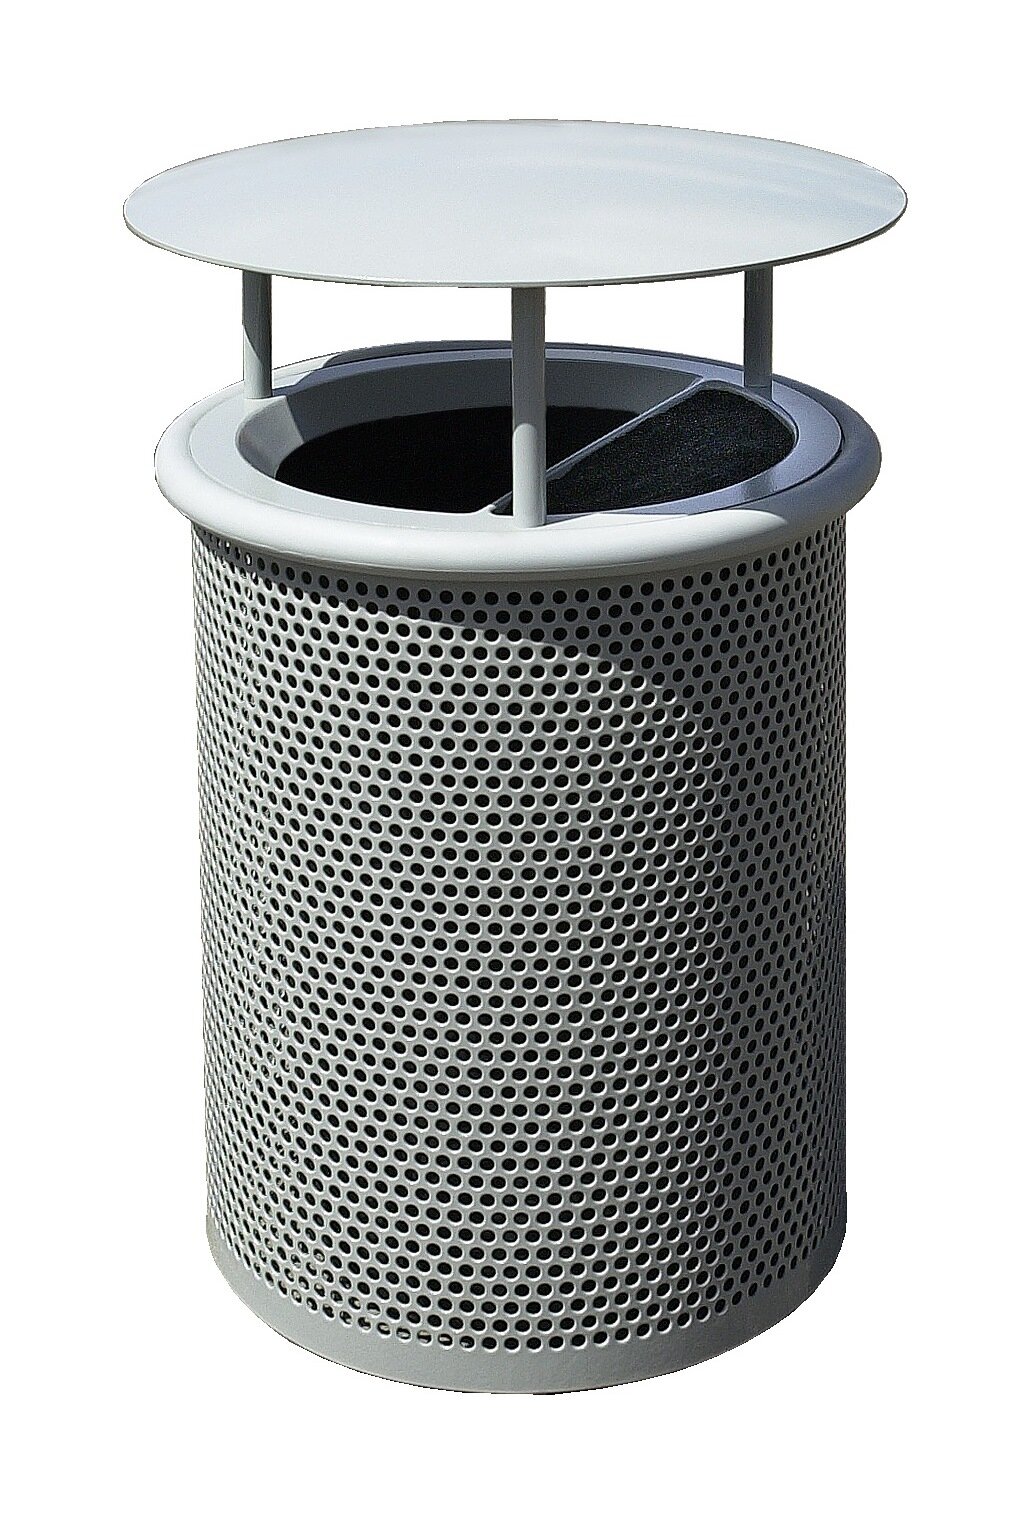 30 Gallon Ash Trash Lid Covered Outdoor Waste Container MF3006